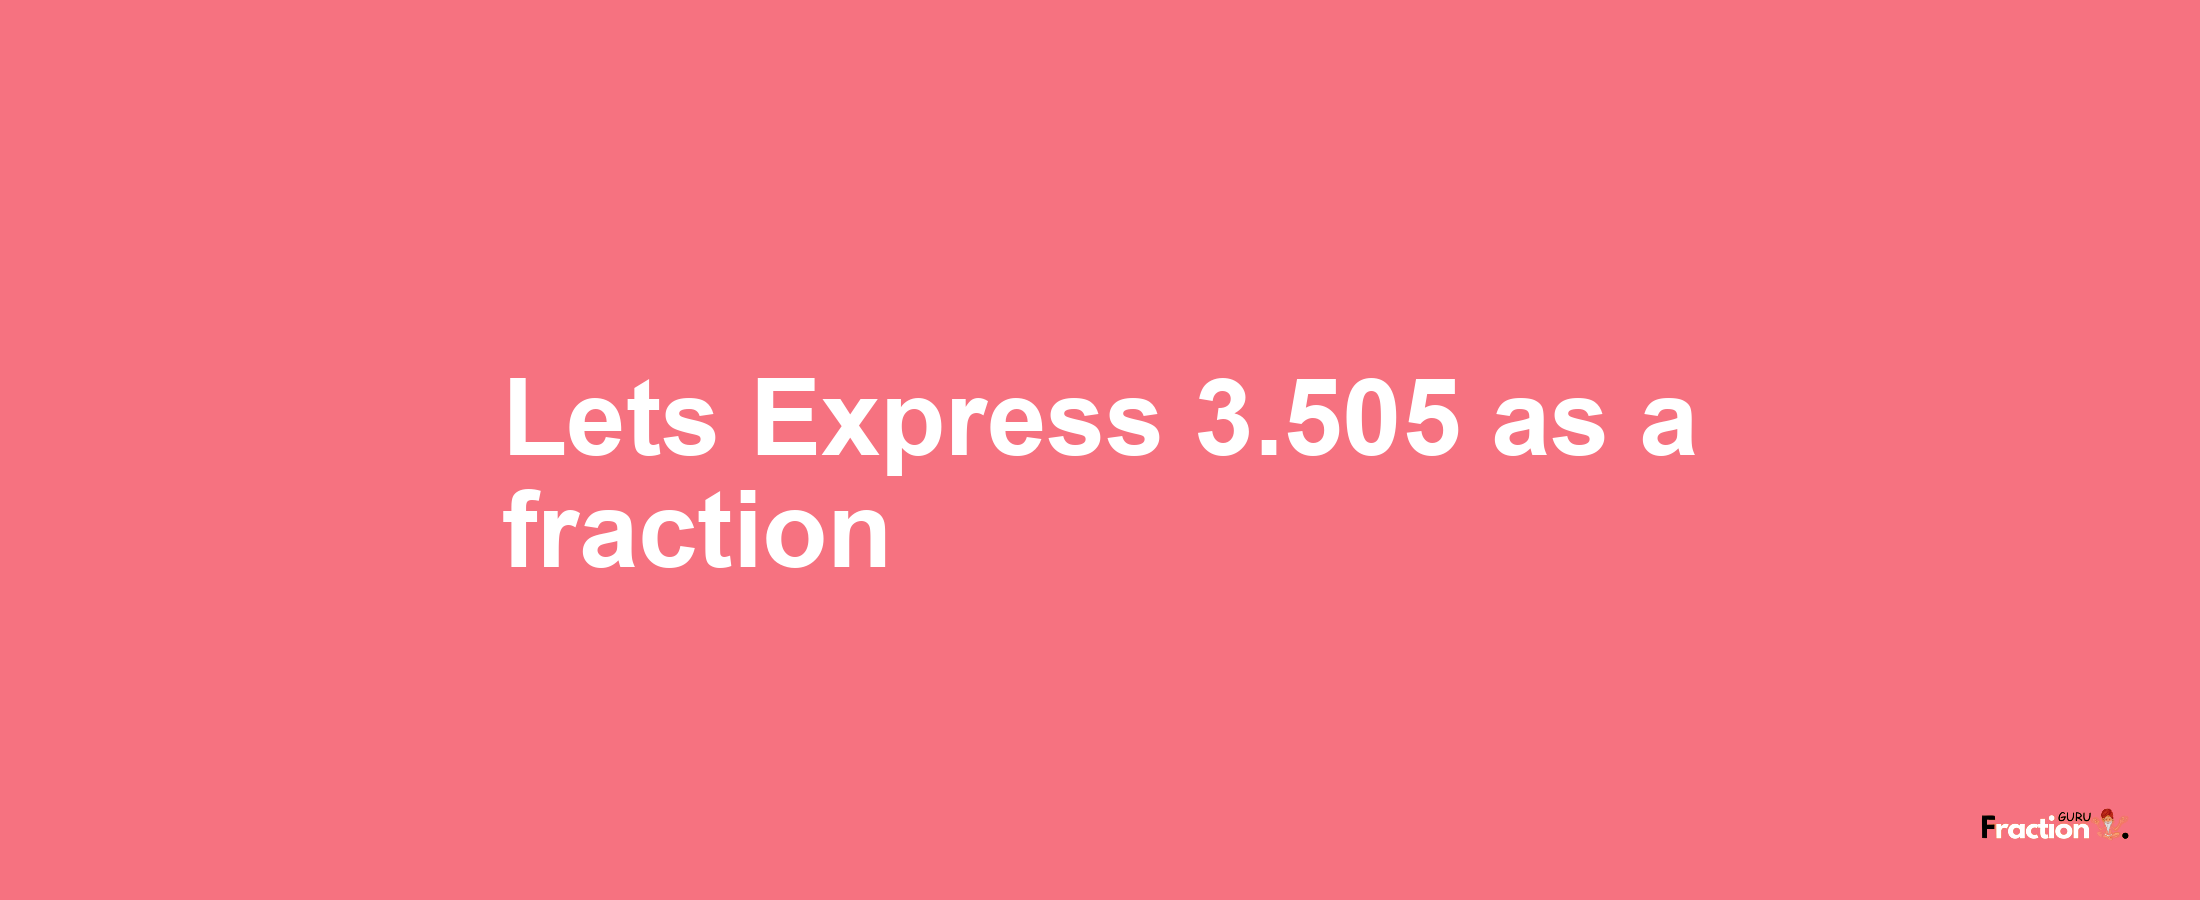 Lets Express 3.505 as afraction